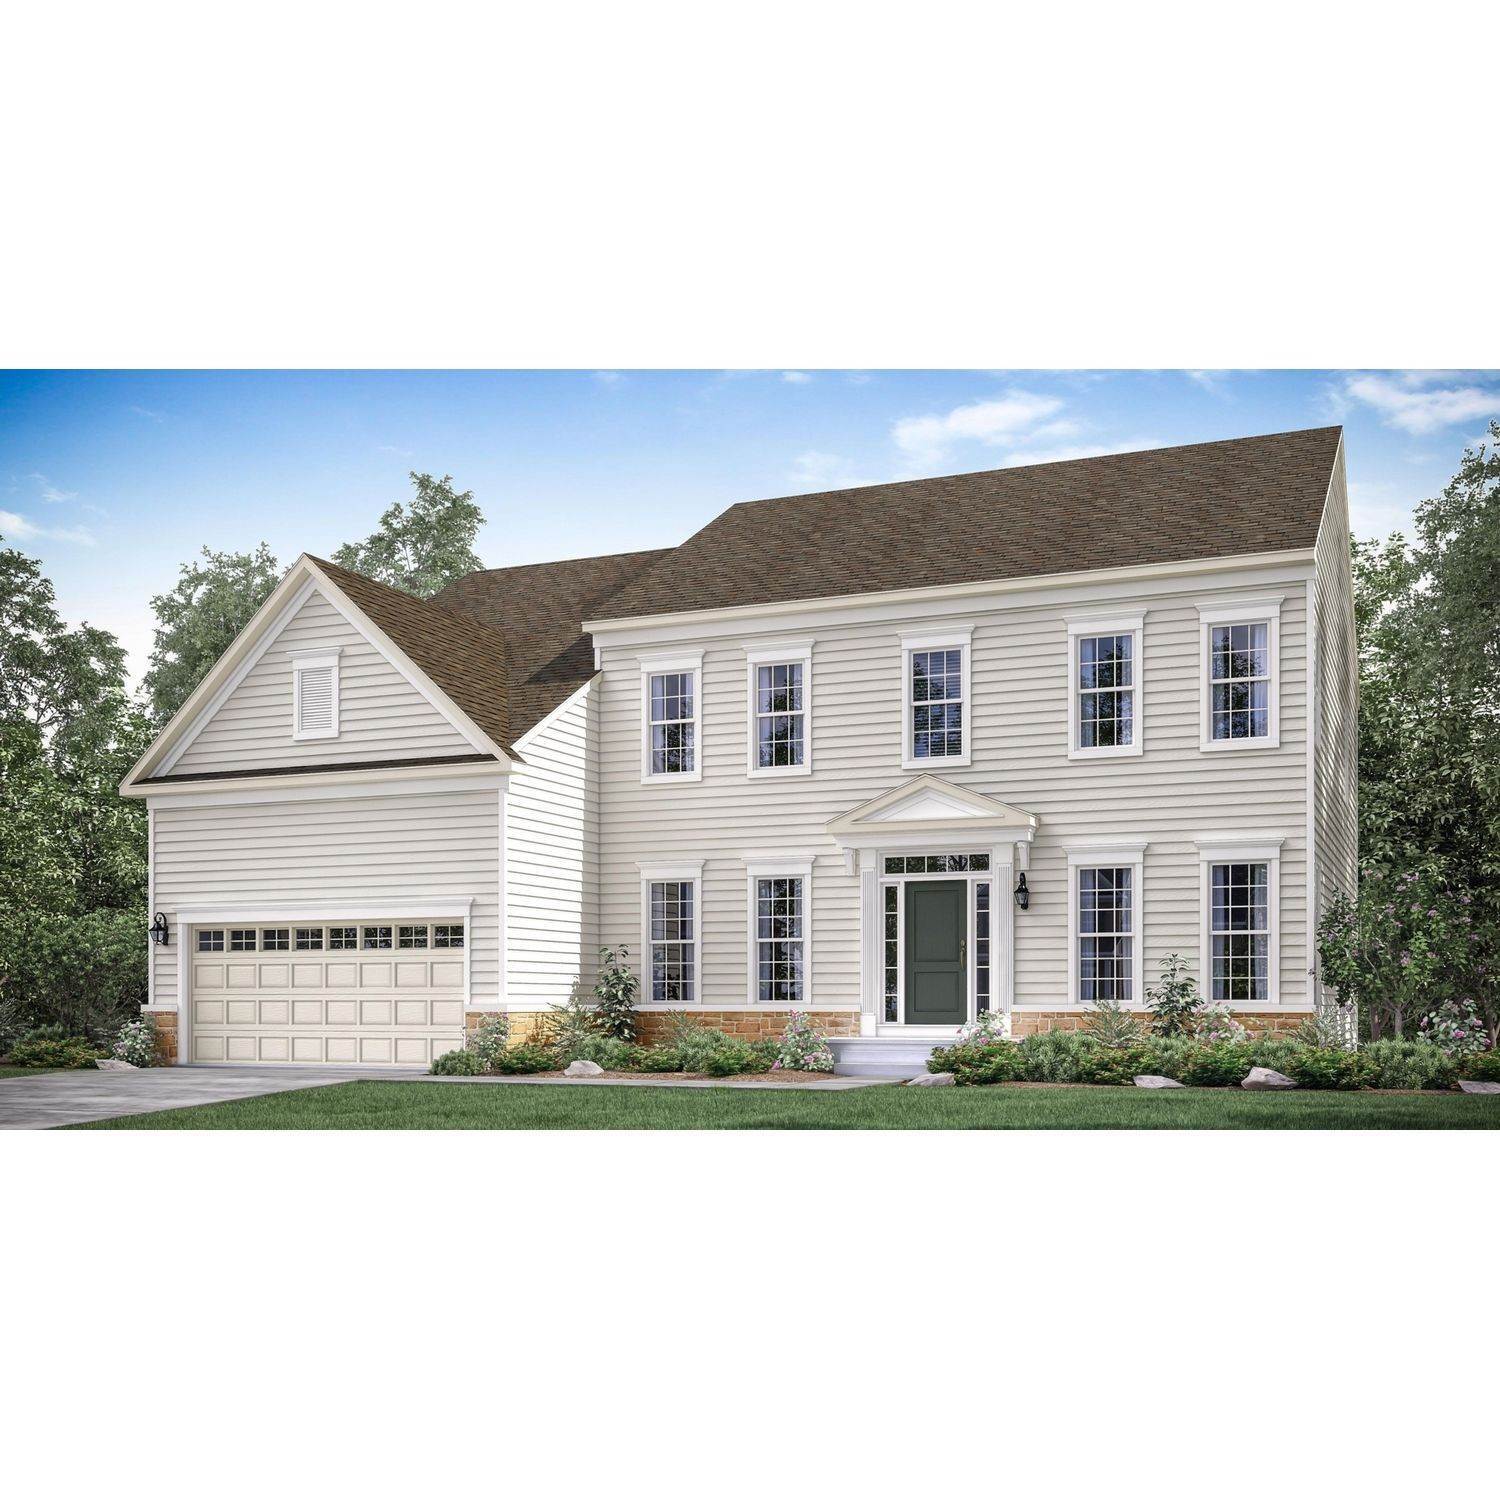 Single Family for Sale at Brandywine, MD 20613